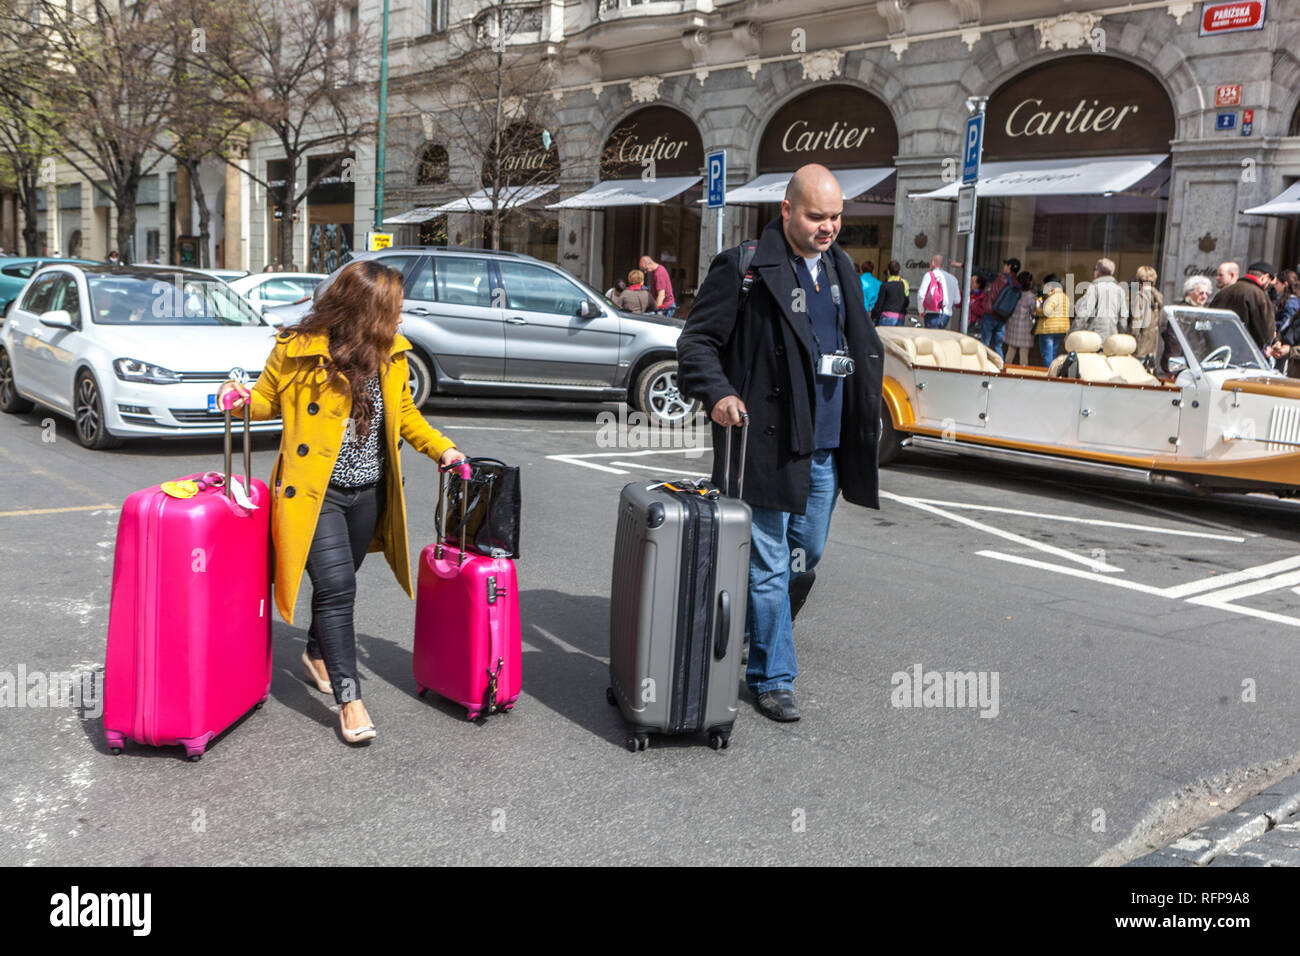 People suitcases in the city center, Parizska Street Prague, Czech Republic Traveling woman with luggage Cartier shop background suitcase woman street Stock Photo